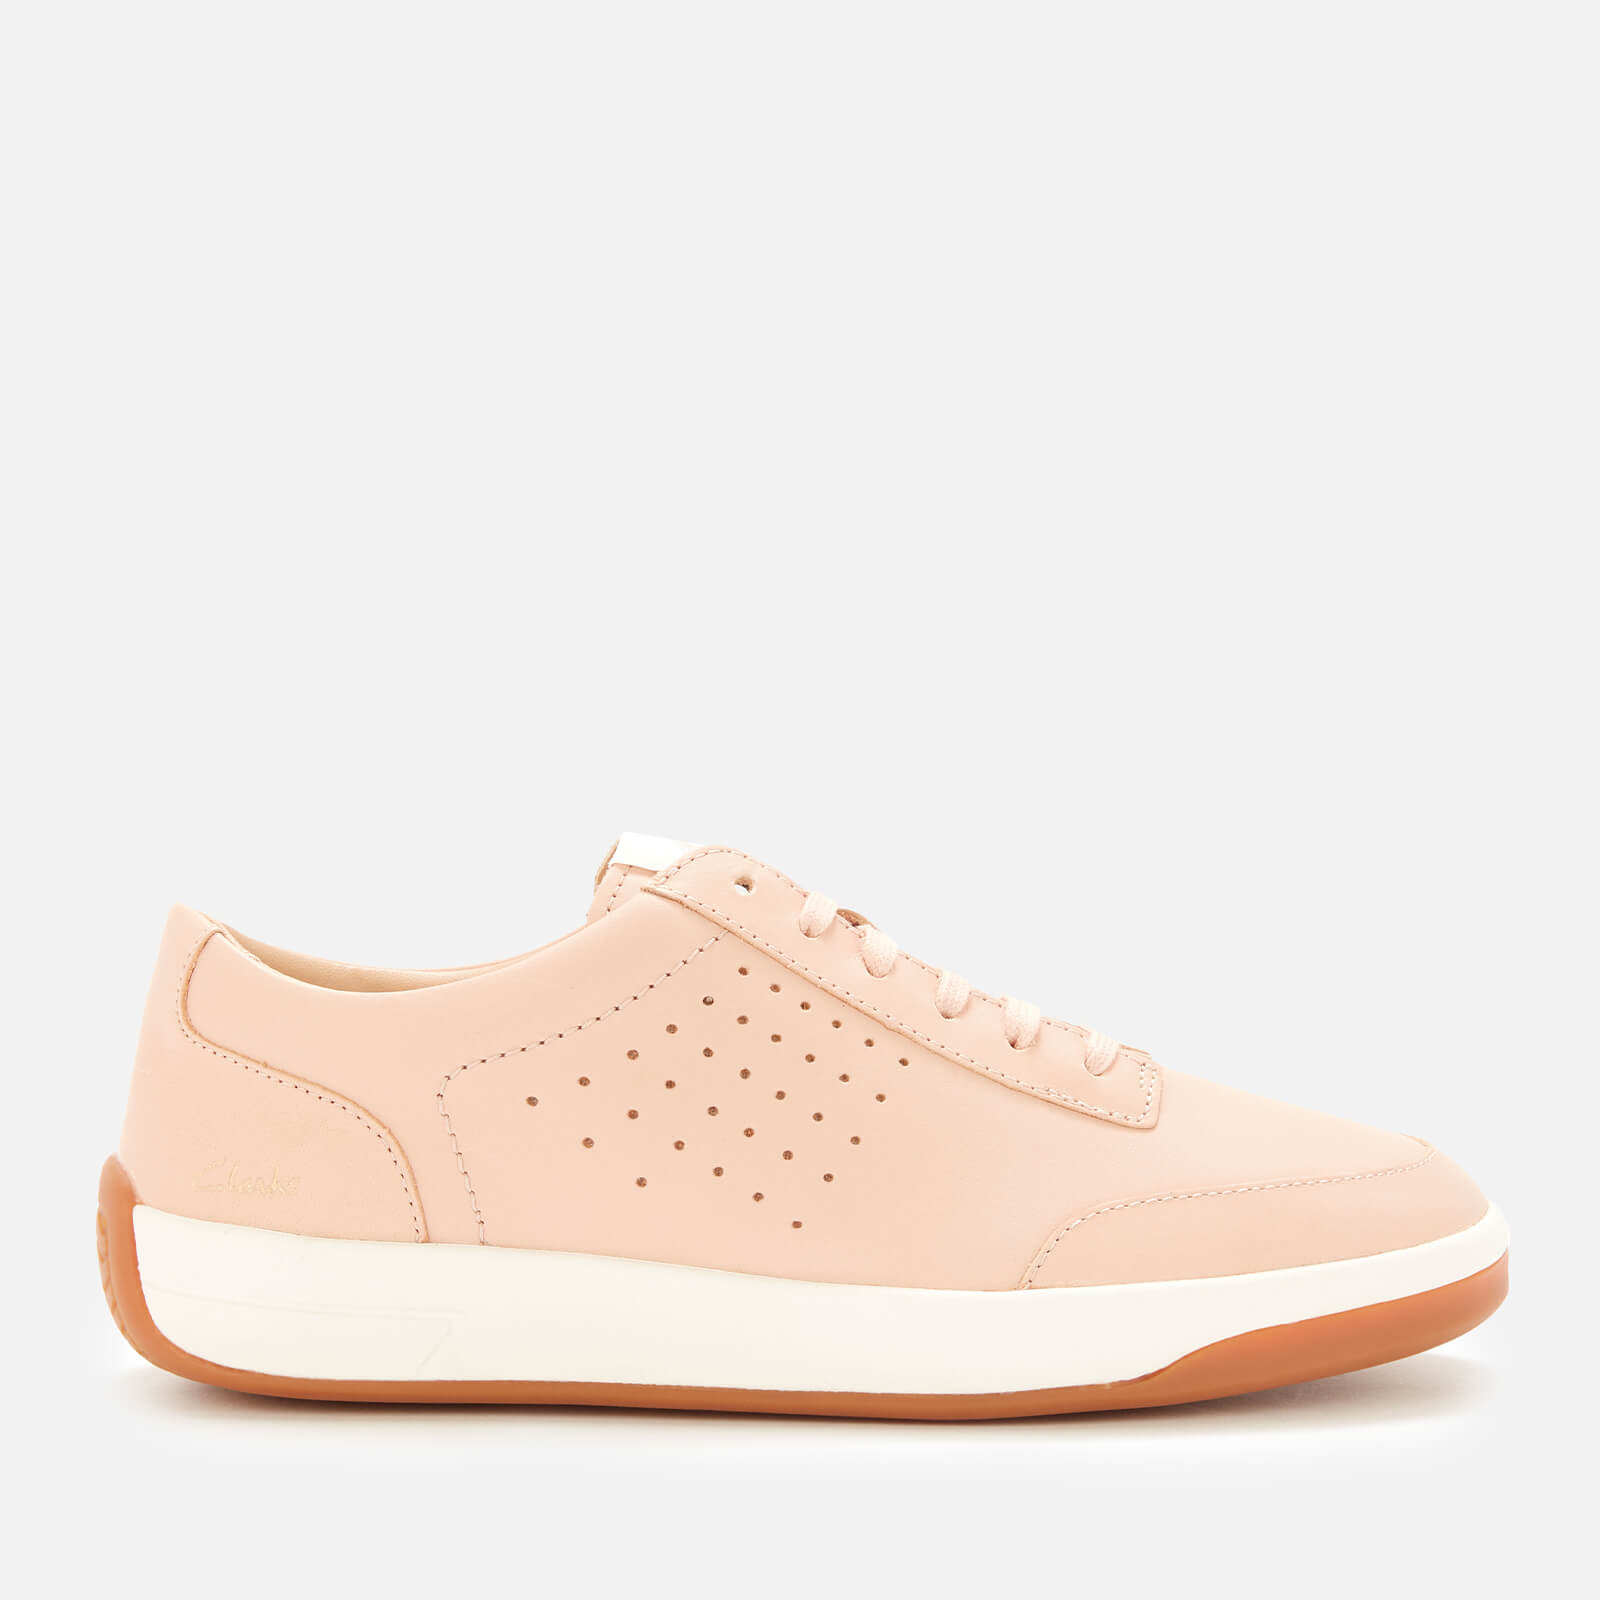 Clarks Women's Hero Air Lace Low Top Trainers - Light Pink - UK 3